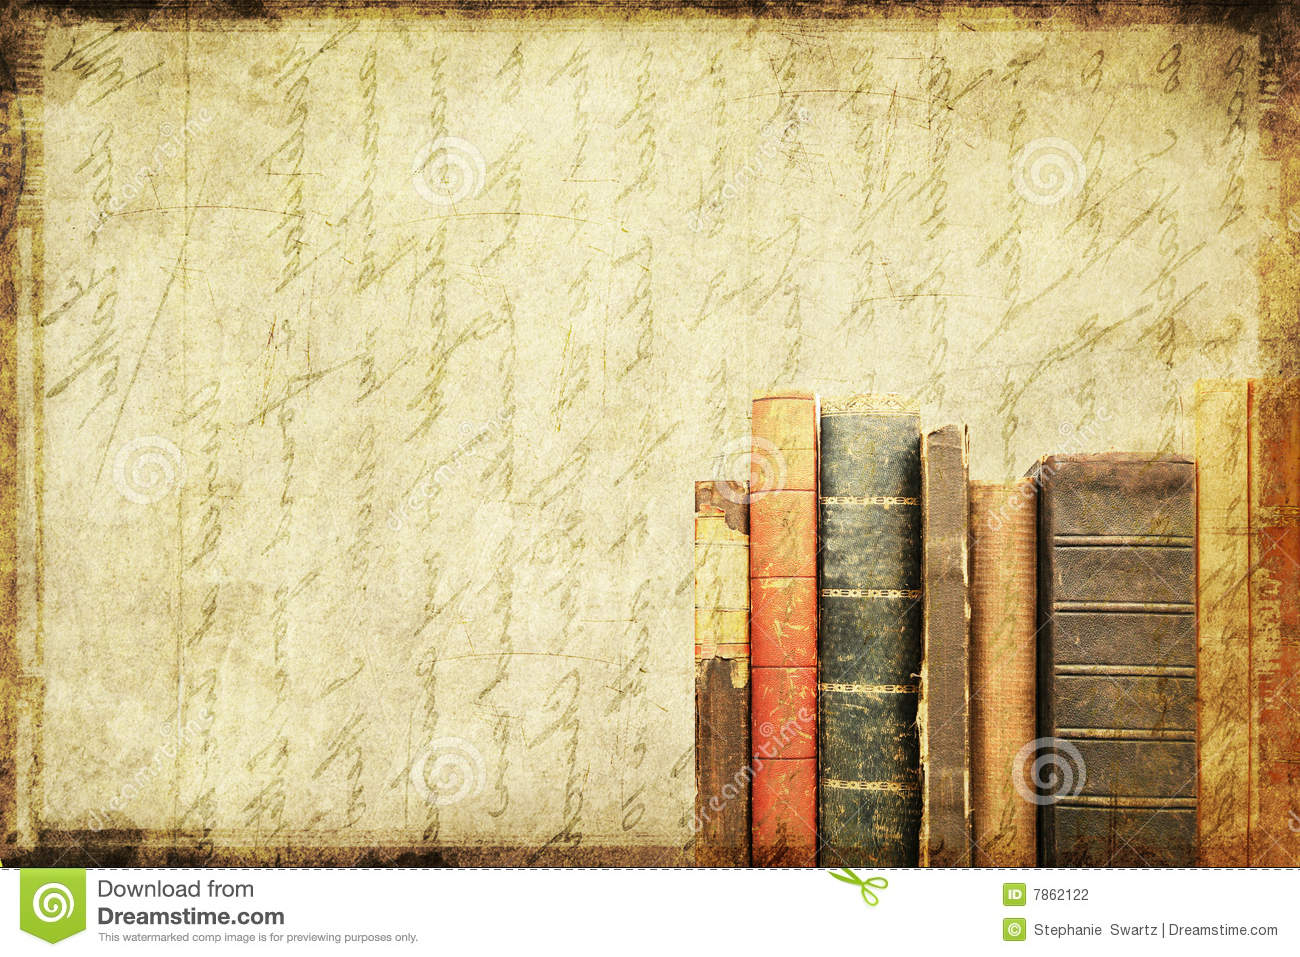 background images books #22